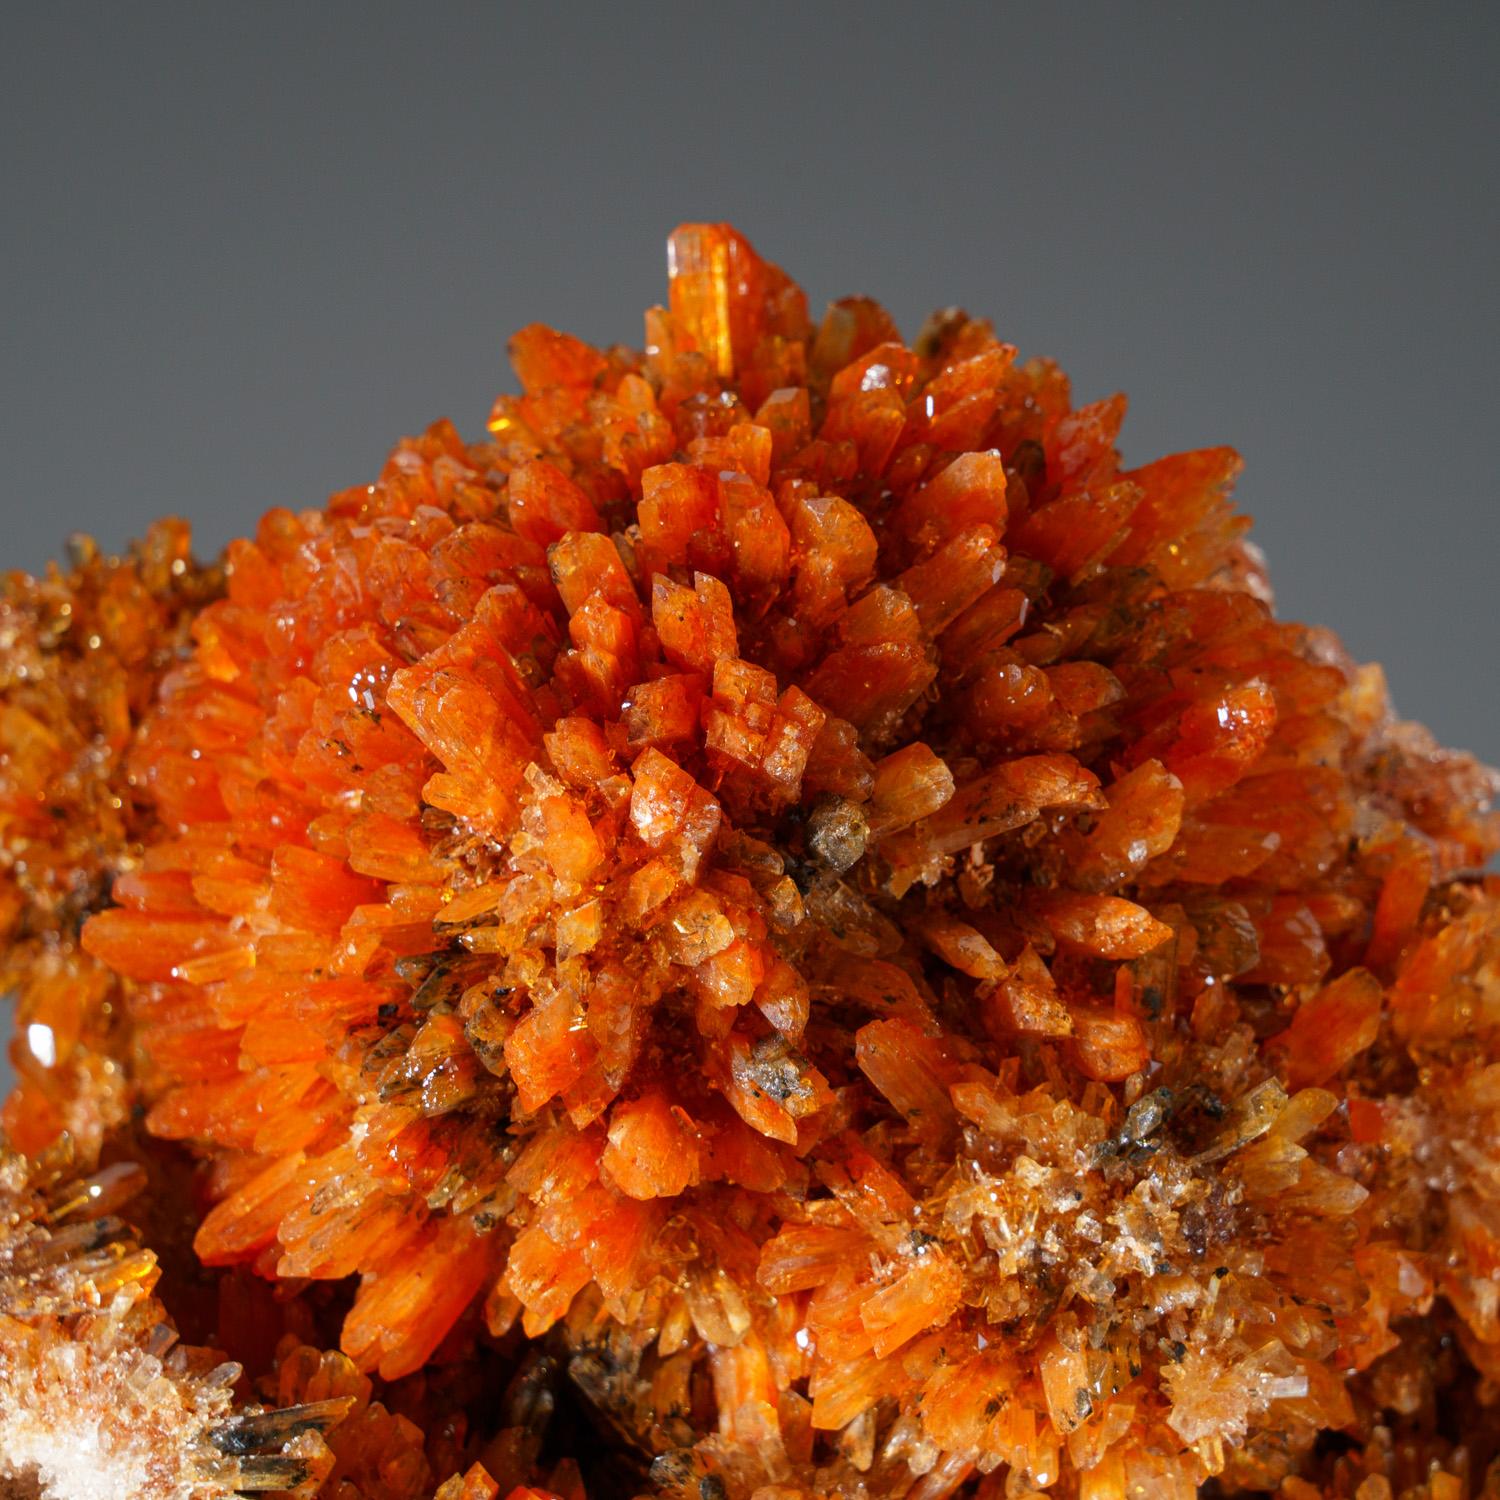 From Mina Navidad, 19 km northwest of Abasolo, Durango, Mexico

Lustrous transparent colorless spherical clusters of radiating orange creedite crystals. The creedite crystals are transparent, with orange inclusions that give them color, and have